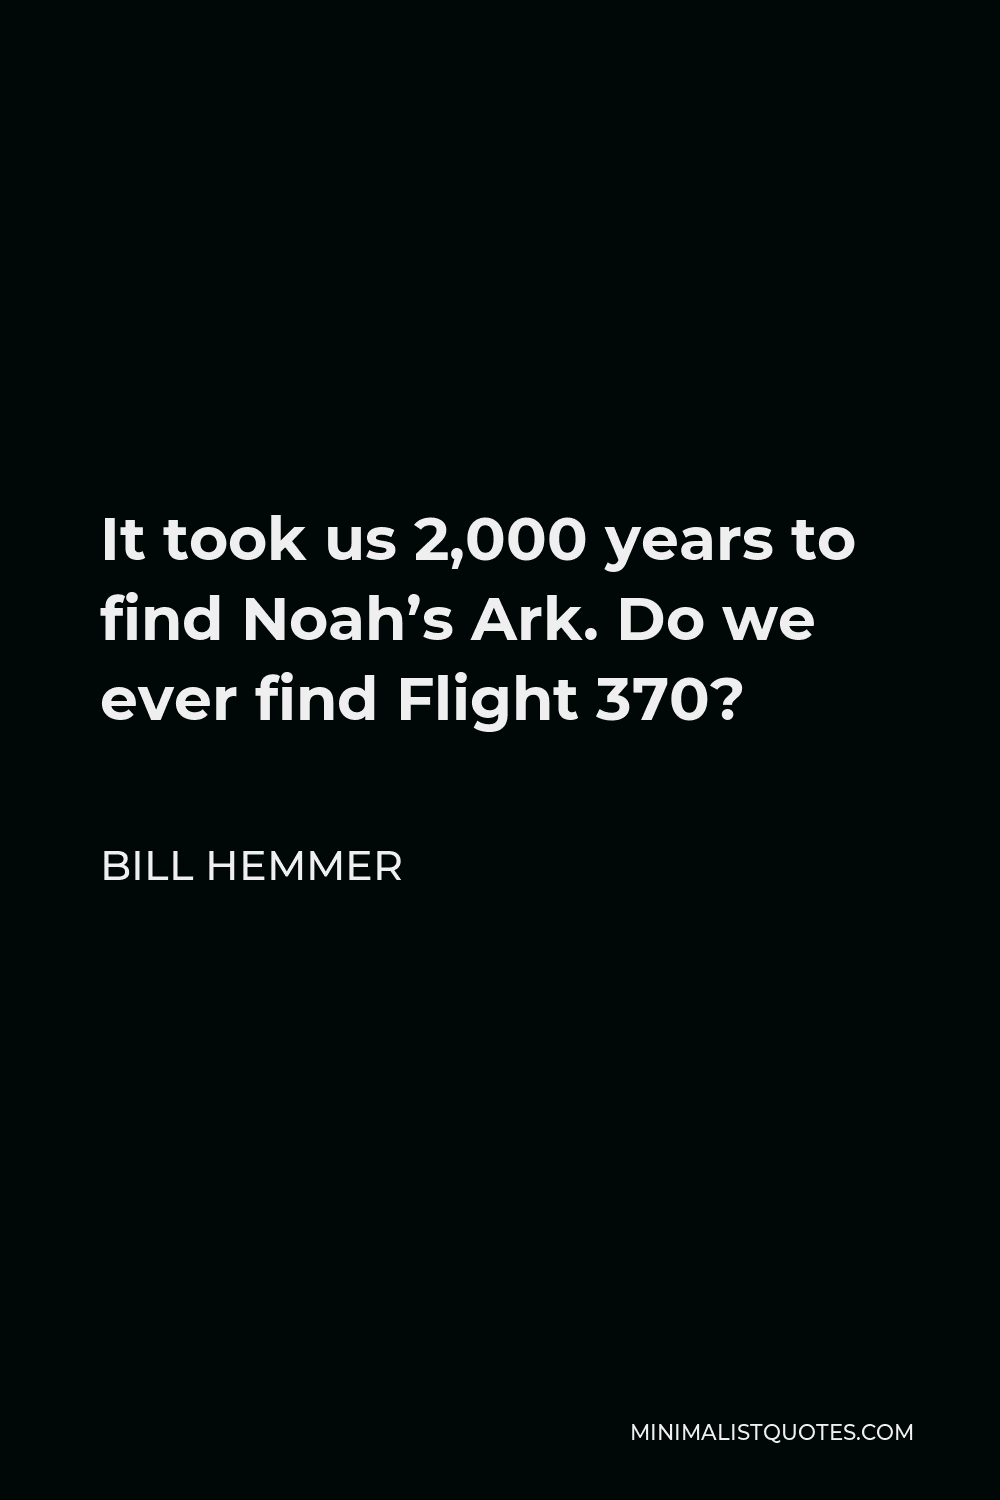 Bill Hemmer Quote - It took us 2,000 years to find Noah’s Ark. Do we ever find Flight 370?